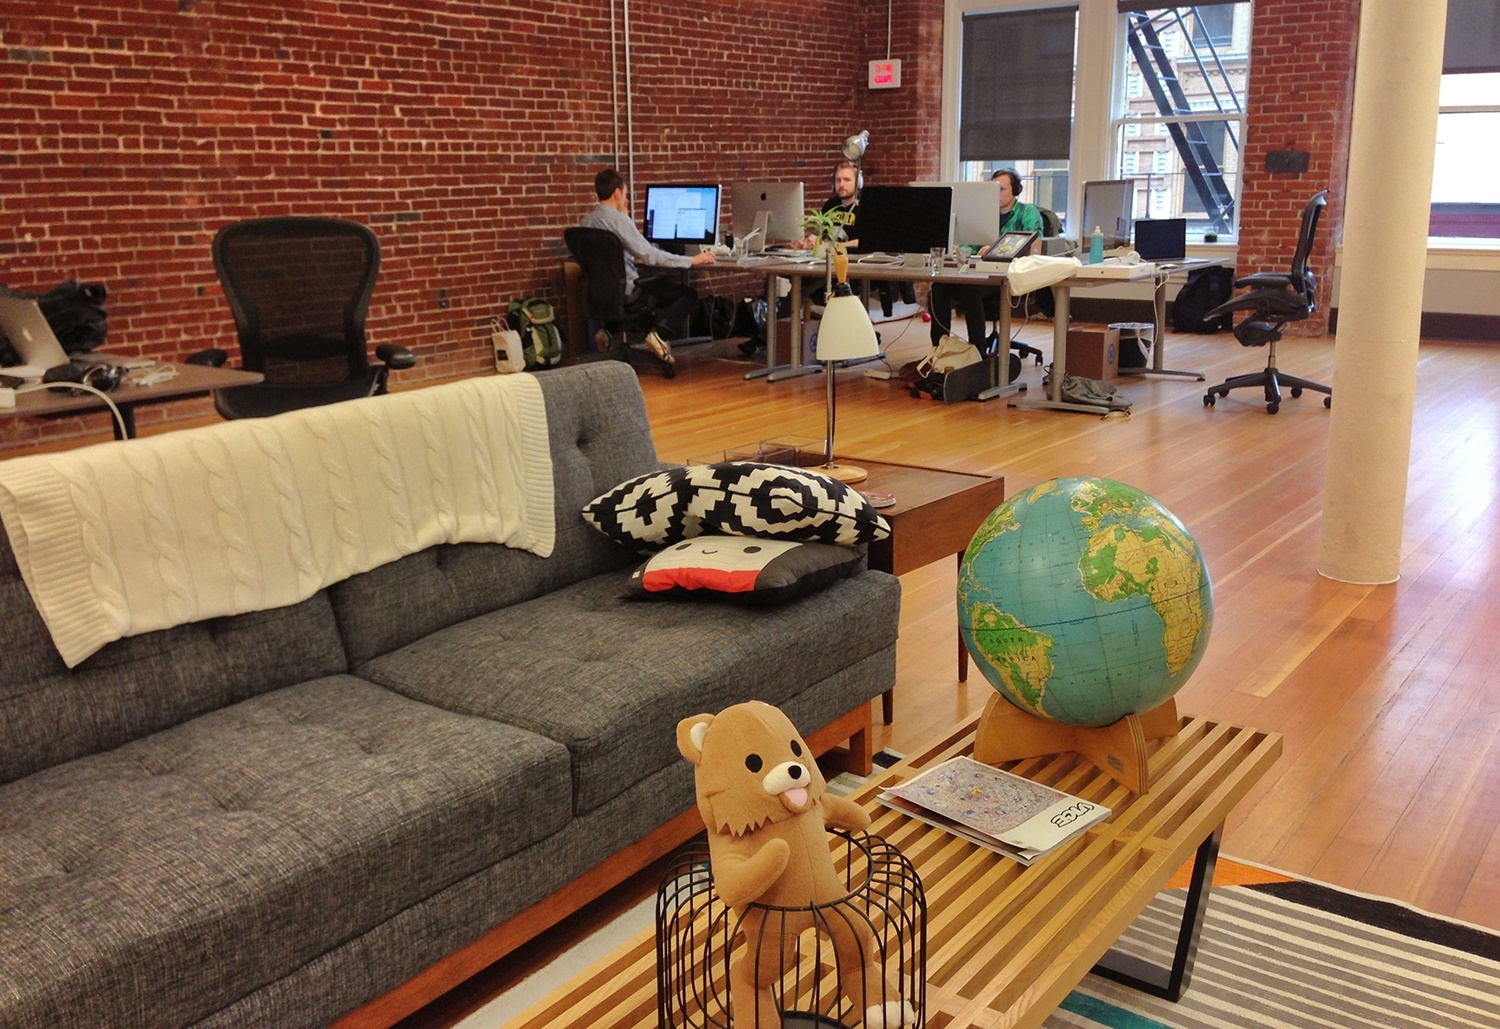 Take a Look at Quick Left’s Portland Offices